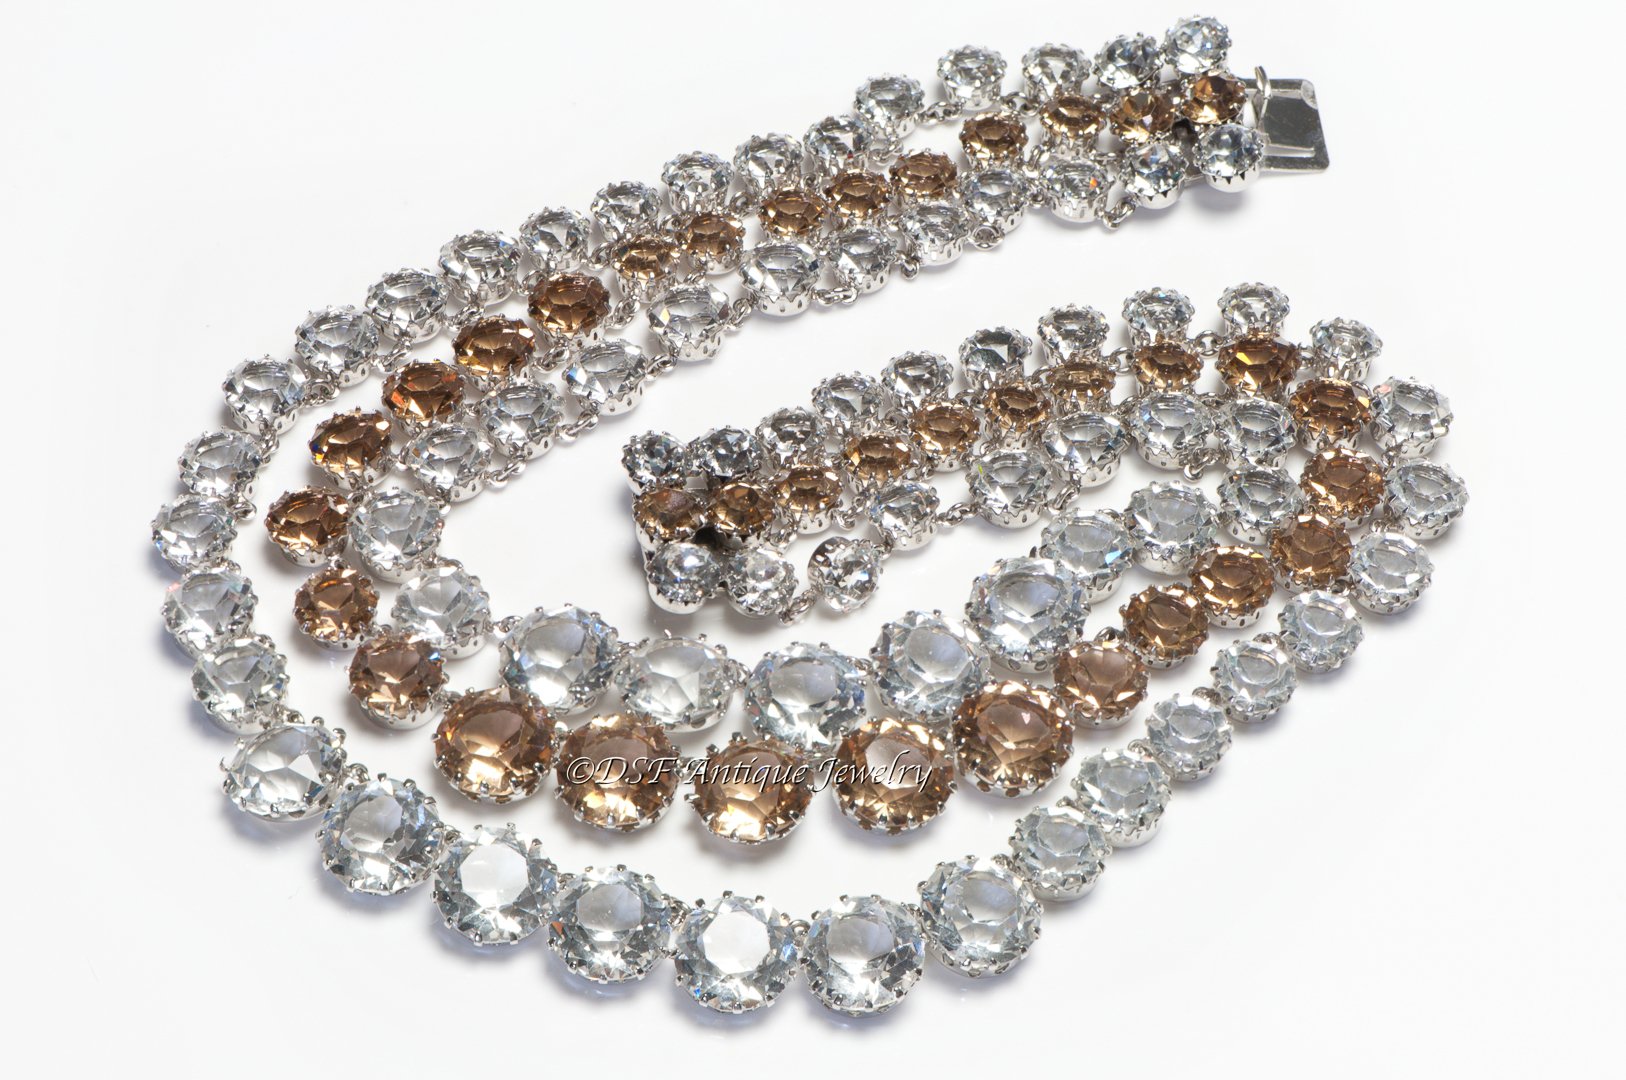 Christian Dior Couture 1960 Yves Saint Laurent Crystal Riviere Collar Necklace